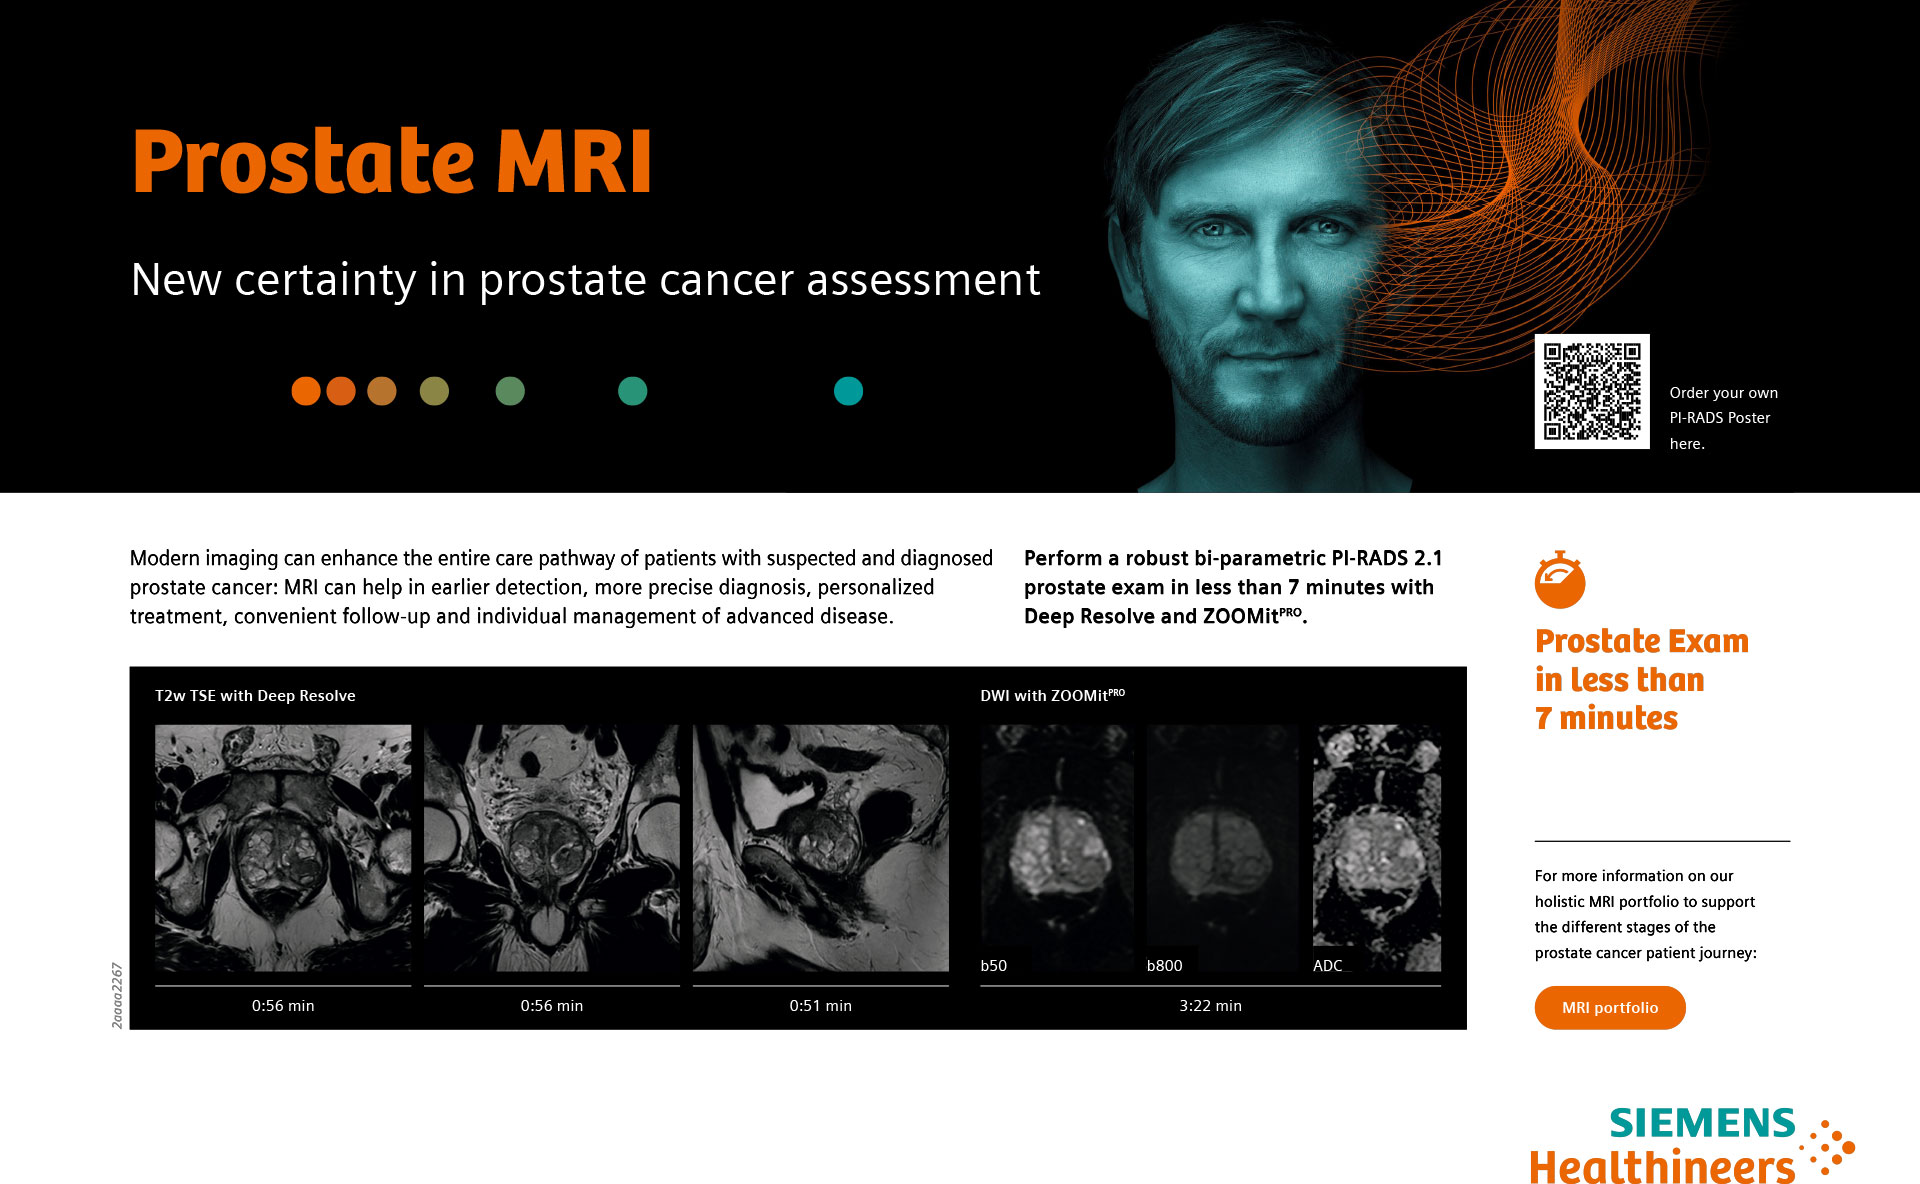 Prostate MRI - New certainty in prostate cancer assessment